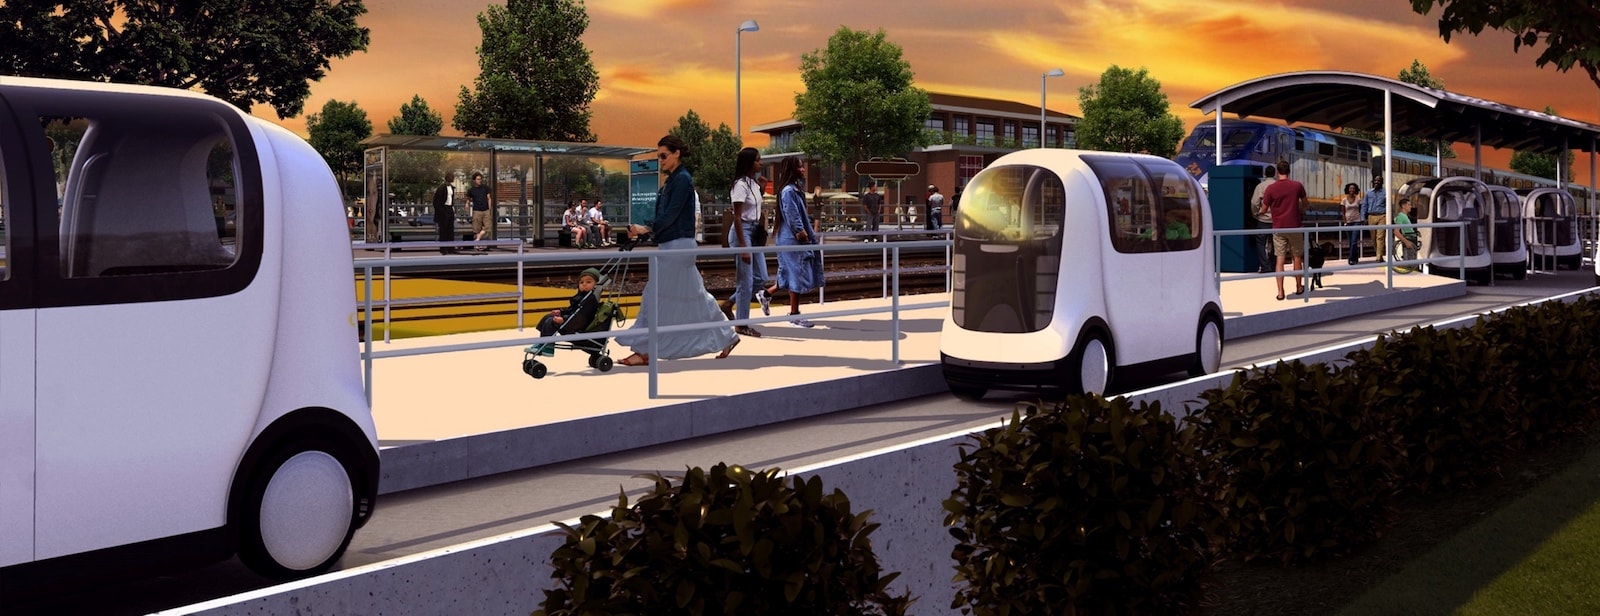 Glydways is an automated personal rapid transit system (PRT) that provides on-demand, high capacity service moving riders in purpose-built autonomous vehicles